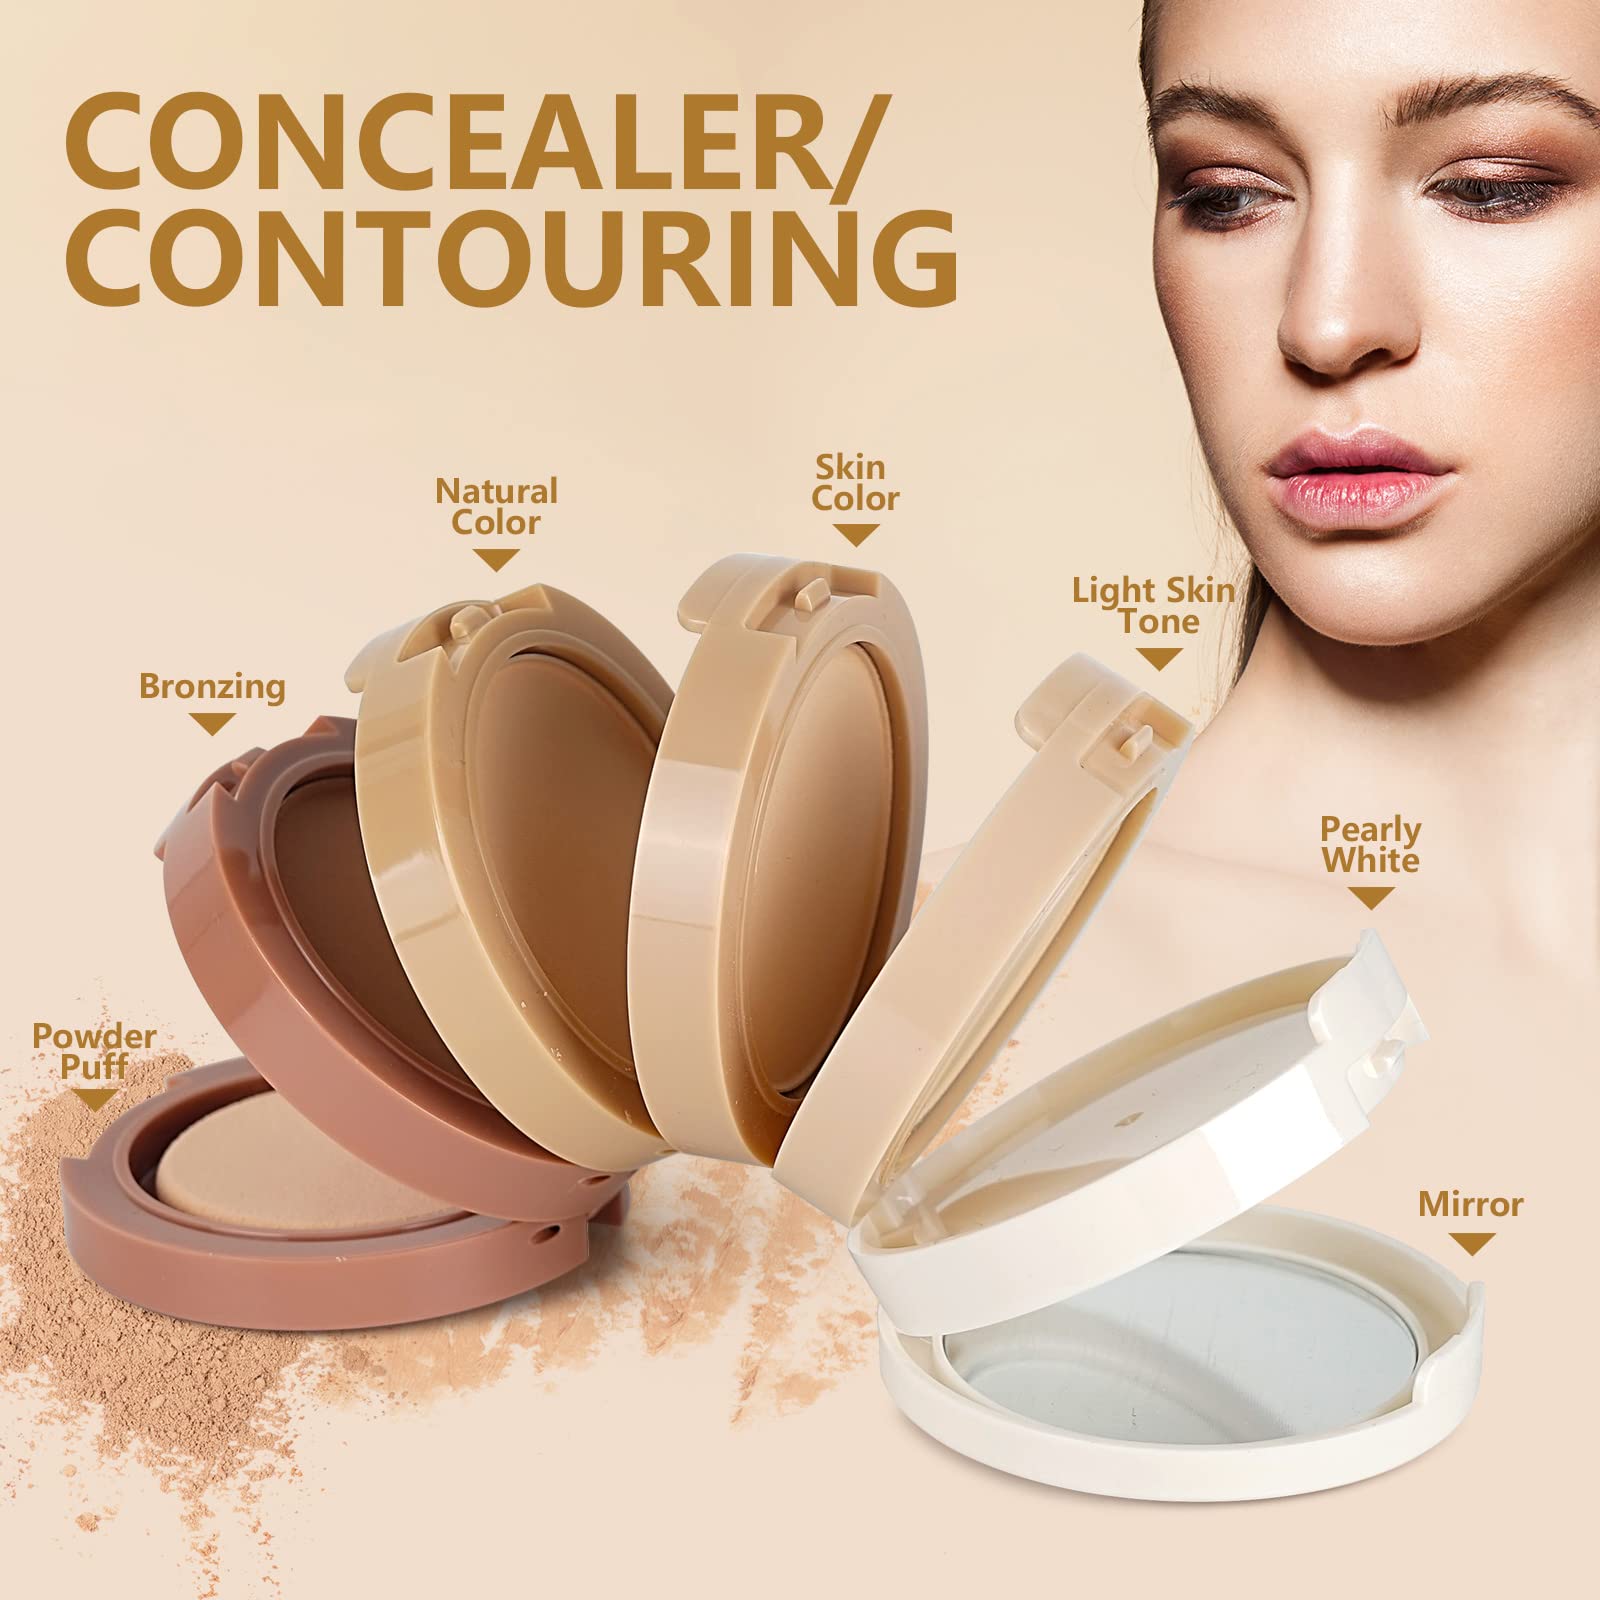 Meao Multi-layer 5 Colour Makeup Powder Compact Powder Make up Contour Face Bronzing Foundation Correcting Pressed Powder - Facial Base Contouring Beauty Cosmetics Bronzer Pallet Palette